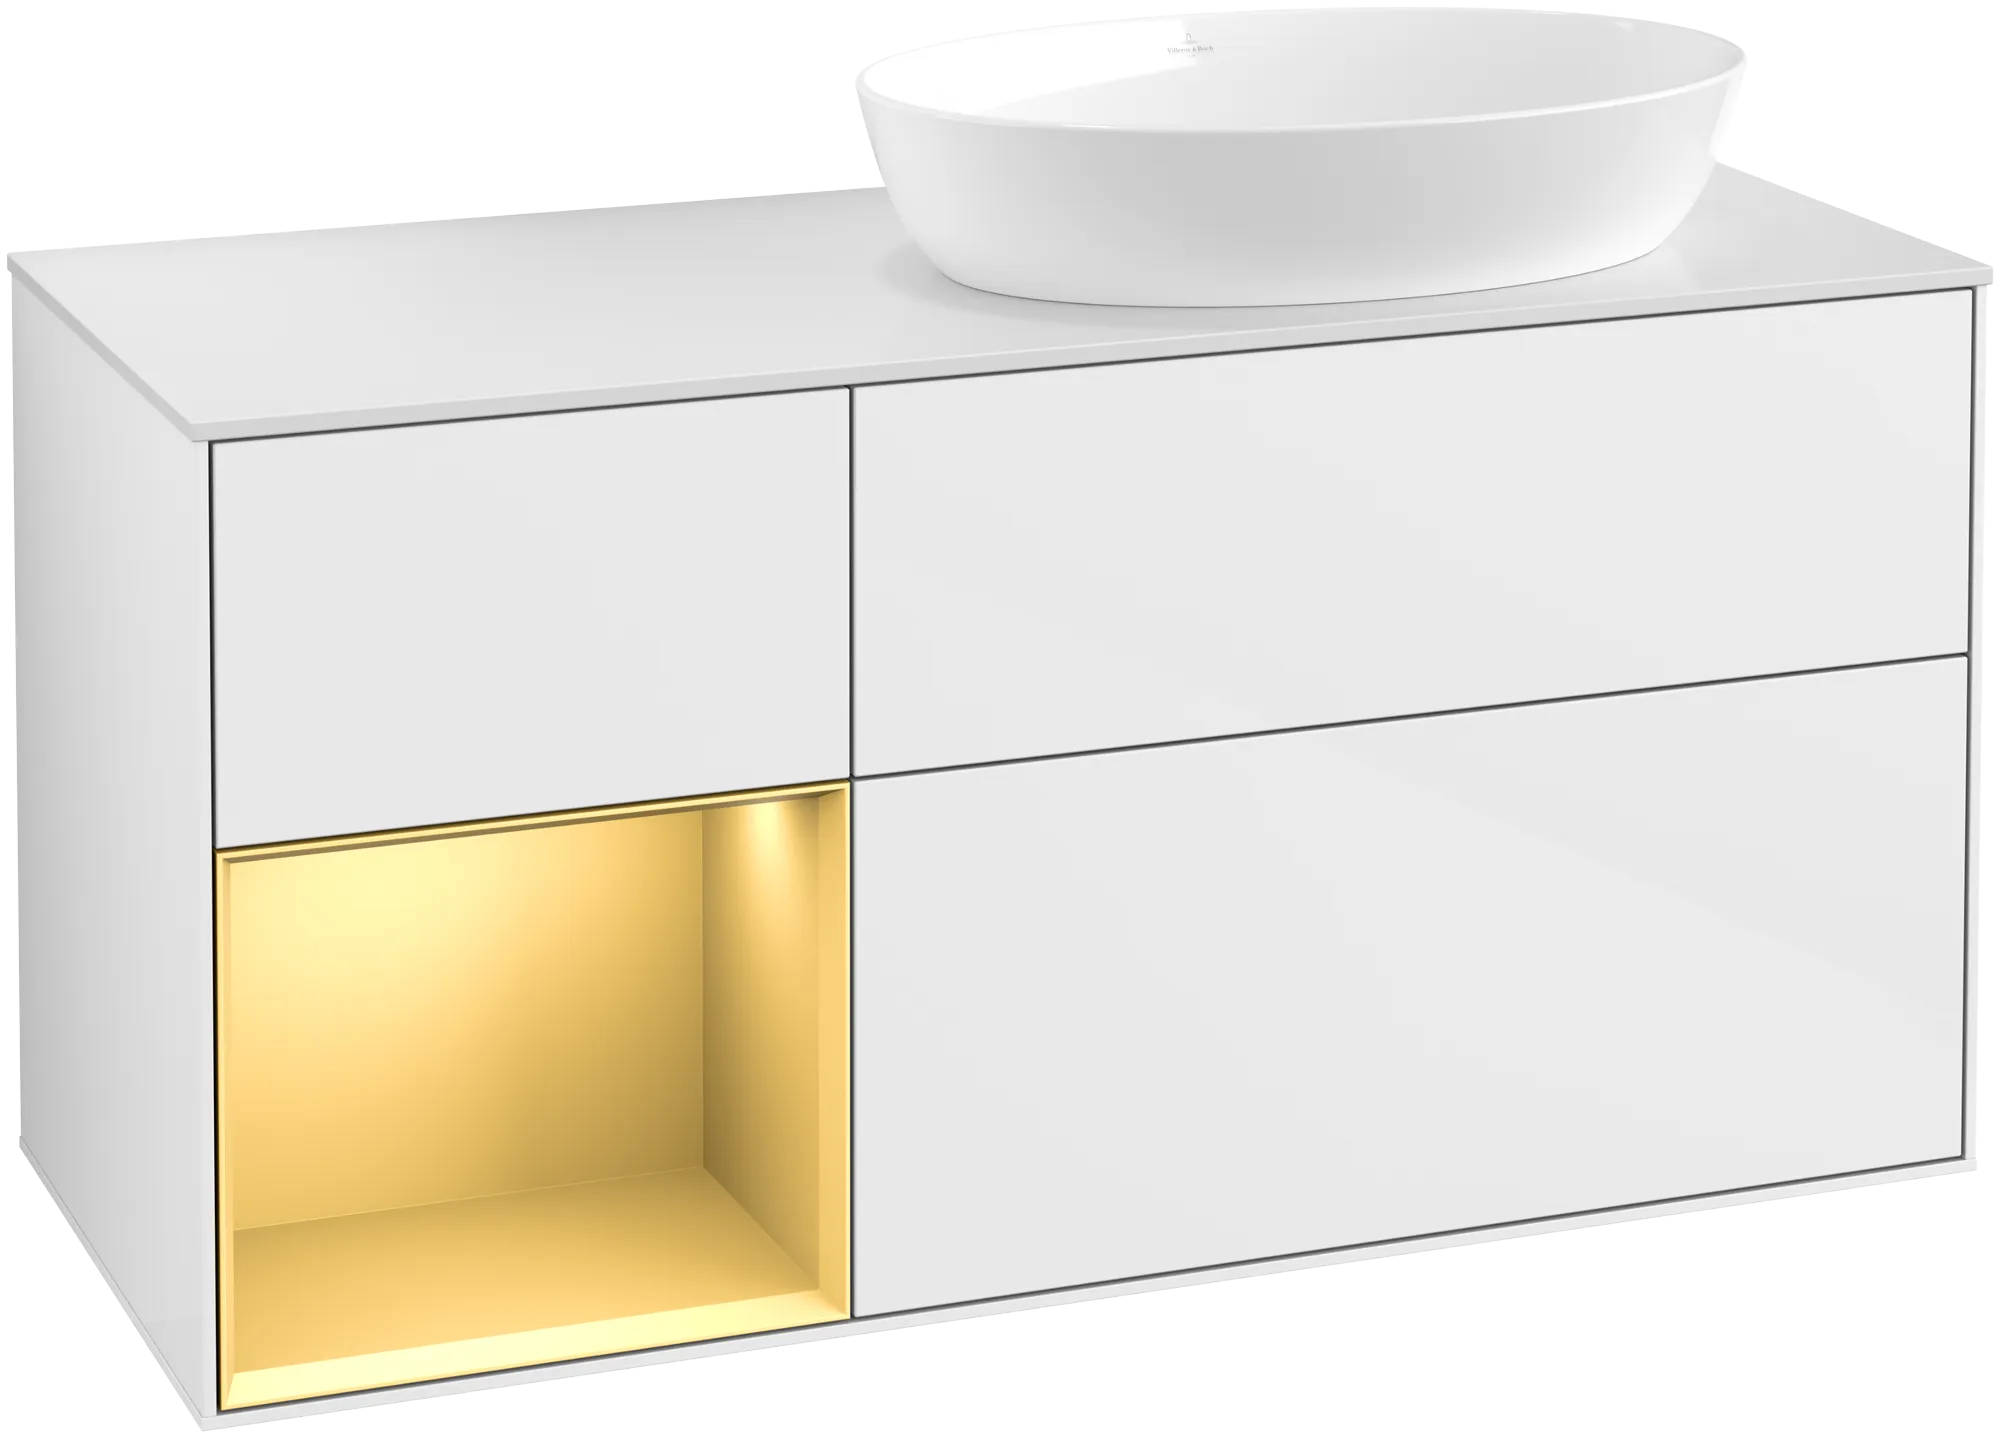 Picture of VILLEROY BOCH Finion Vanity unit, with lighting, 3 pull-out compartments, 1200 x 603 x 501 mm, Glossy White Lacquer / Gold Matt Lacquer / Glass White Matt #GA41HFGF